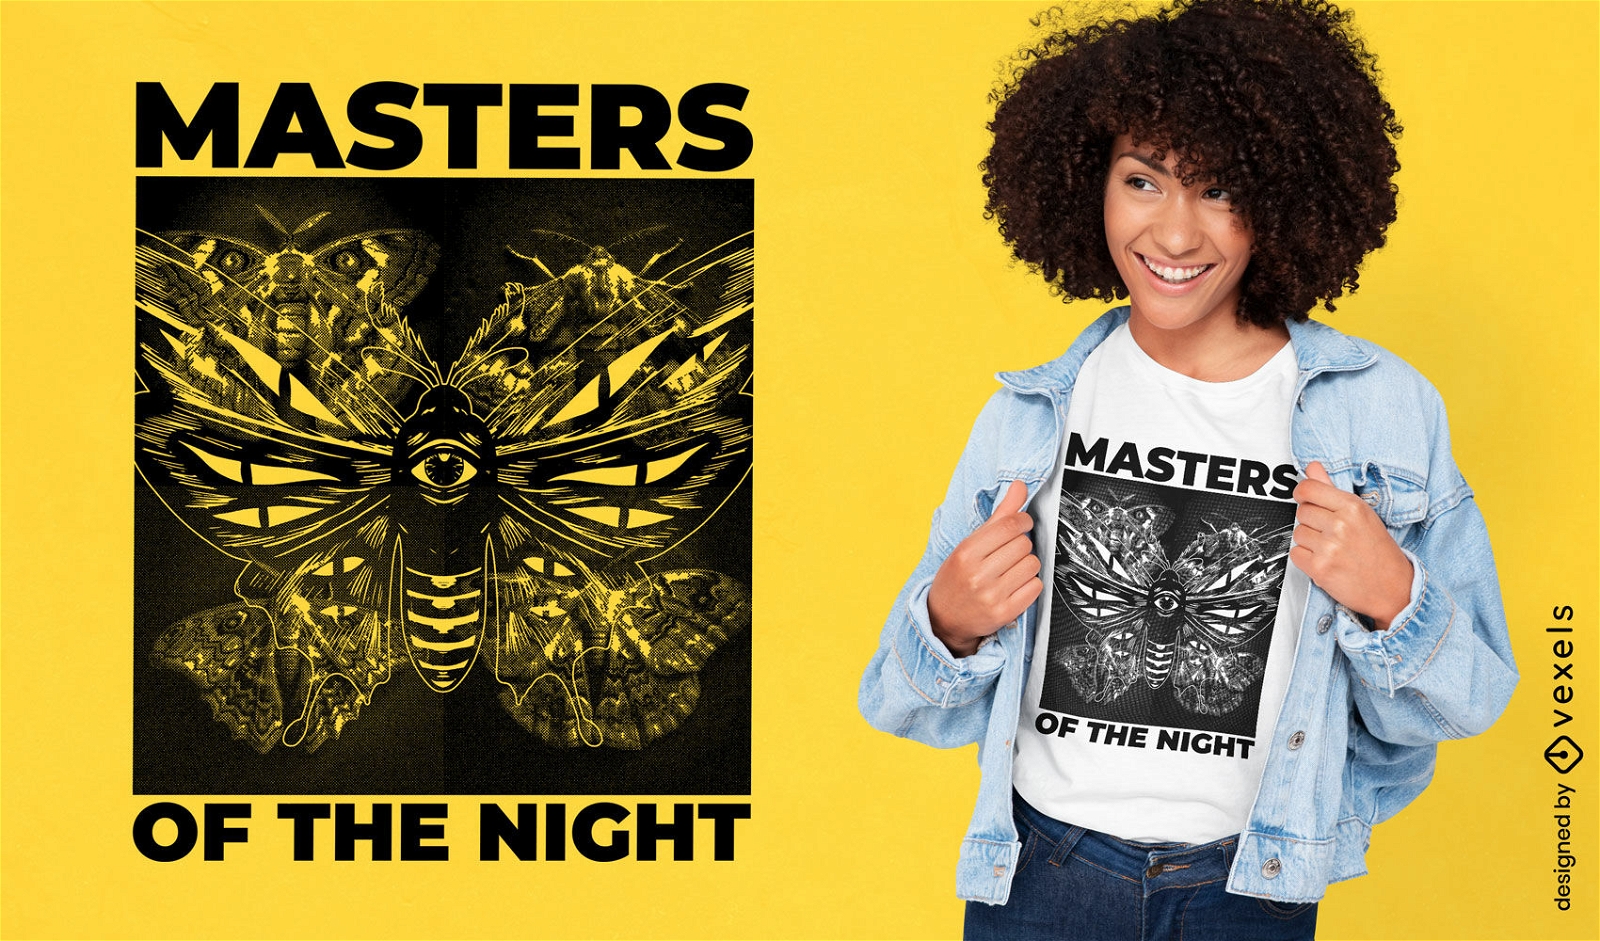 Masters of the night moth t-shirt design